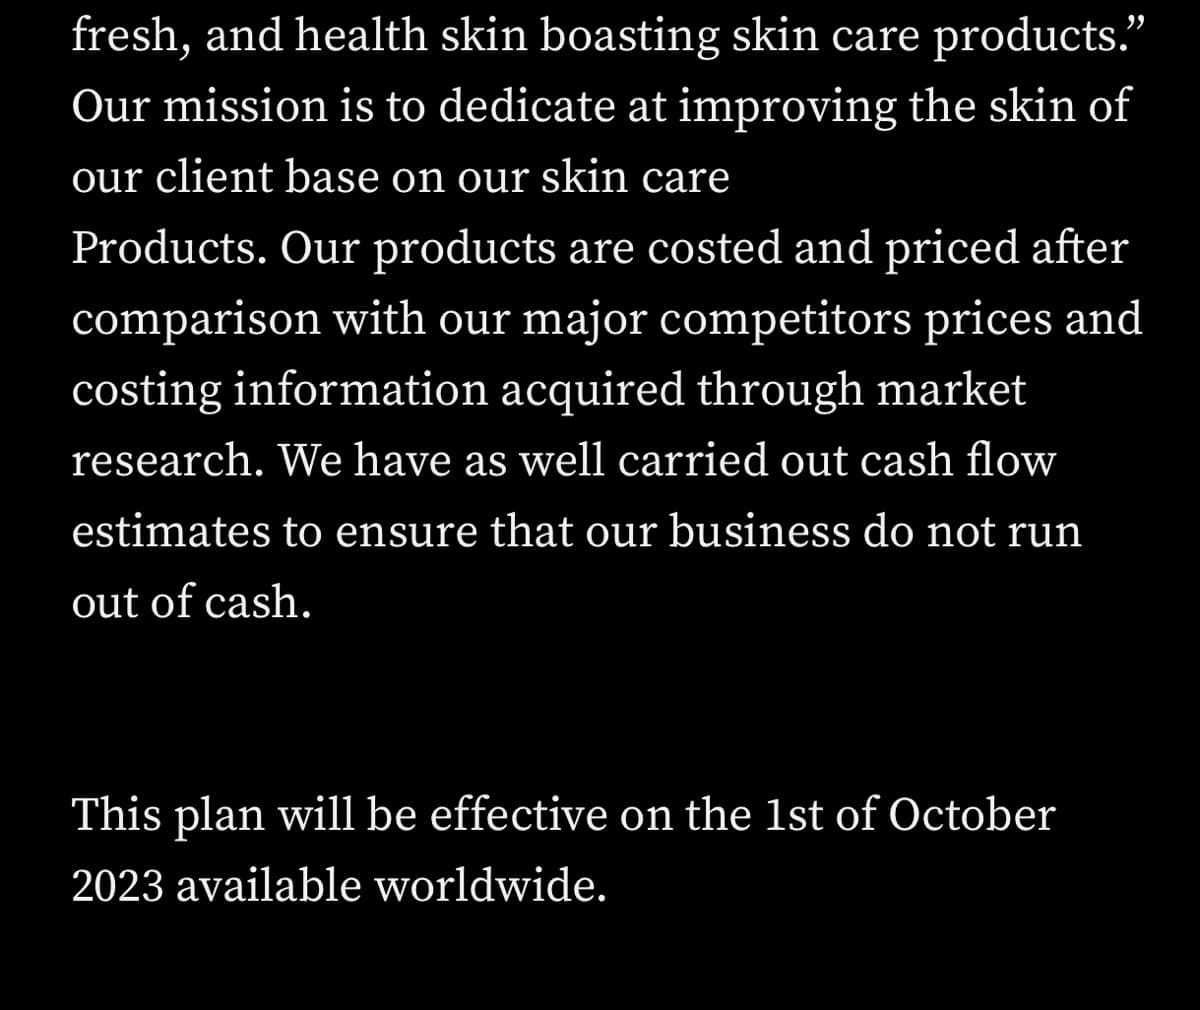 fresh, and health skin boasting skin care products."
Our mission is to dedicate at improving the skin of
our client base on our skin care
Products. Our products are costed and priced after
comparison with our major competitors prices and
costing information acquired through market
research. We have as well carried out cash flow
estimates to ensure that our business do not run
out of cash.
This plan will be effective on the 1st of October
2023 available worldwide.
